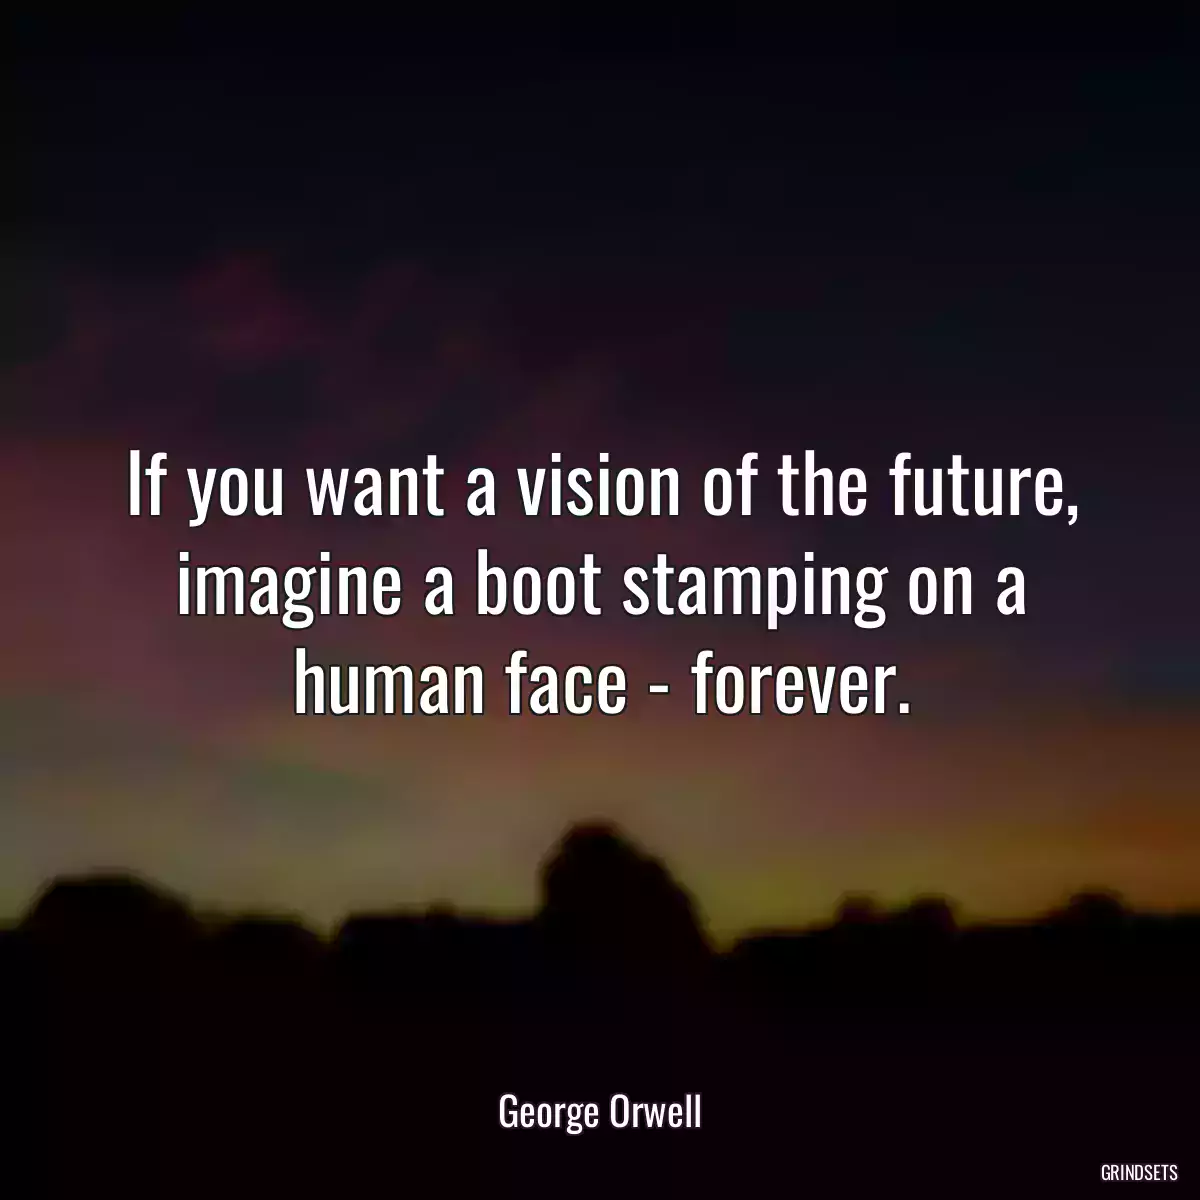 If you want a vision of the future, imagine a boot stamping on a human face - forever.